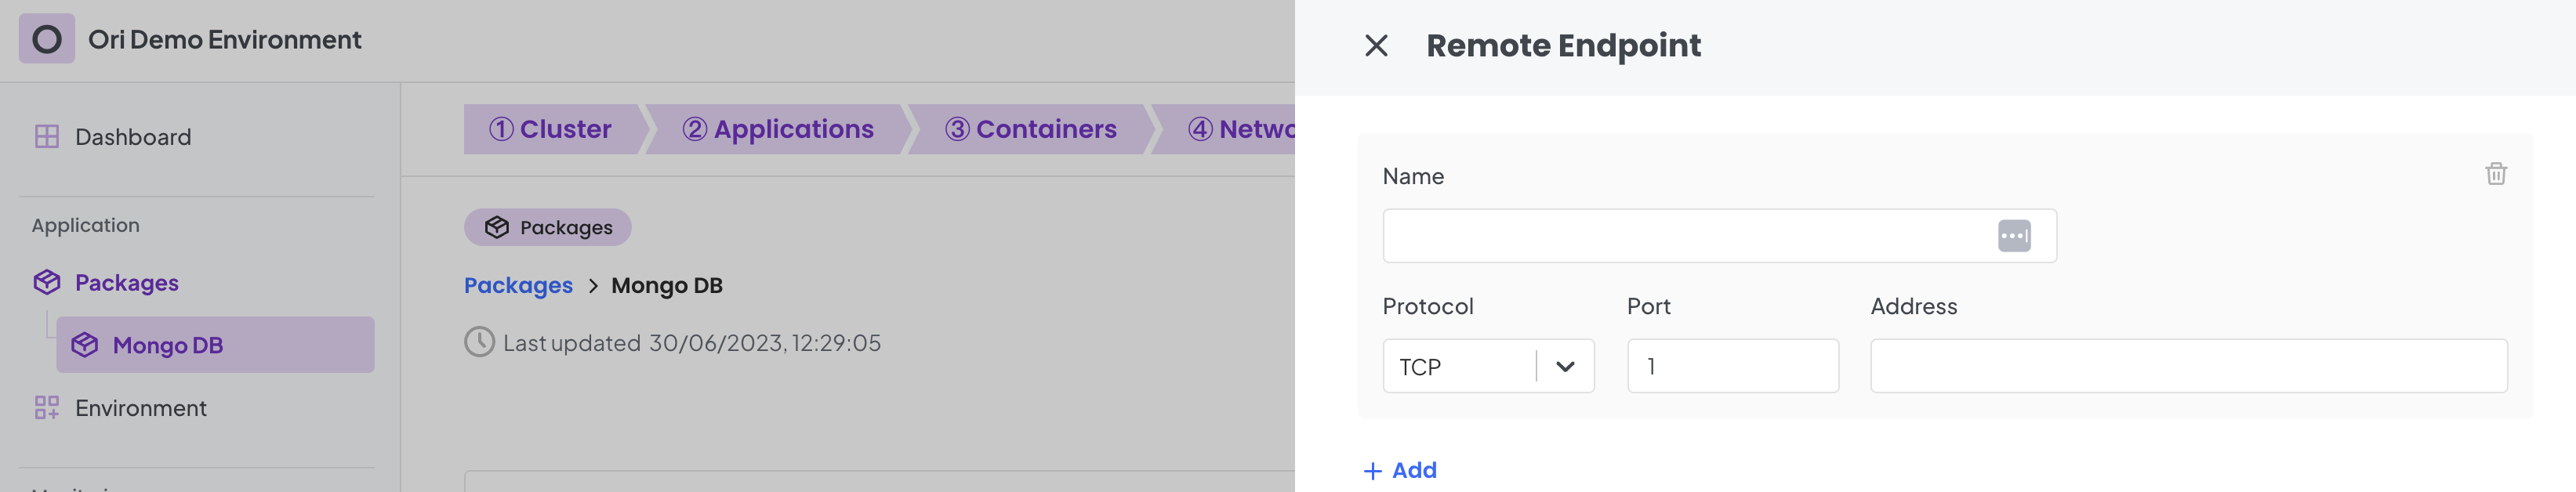 Remote Endpoints Modal